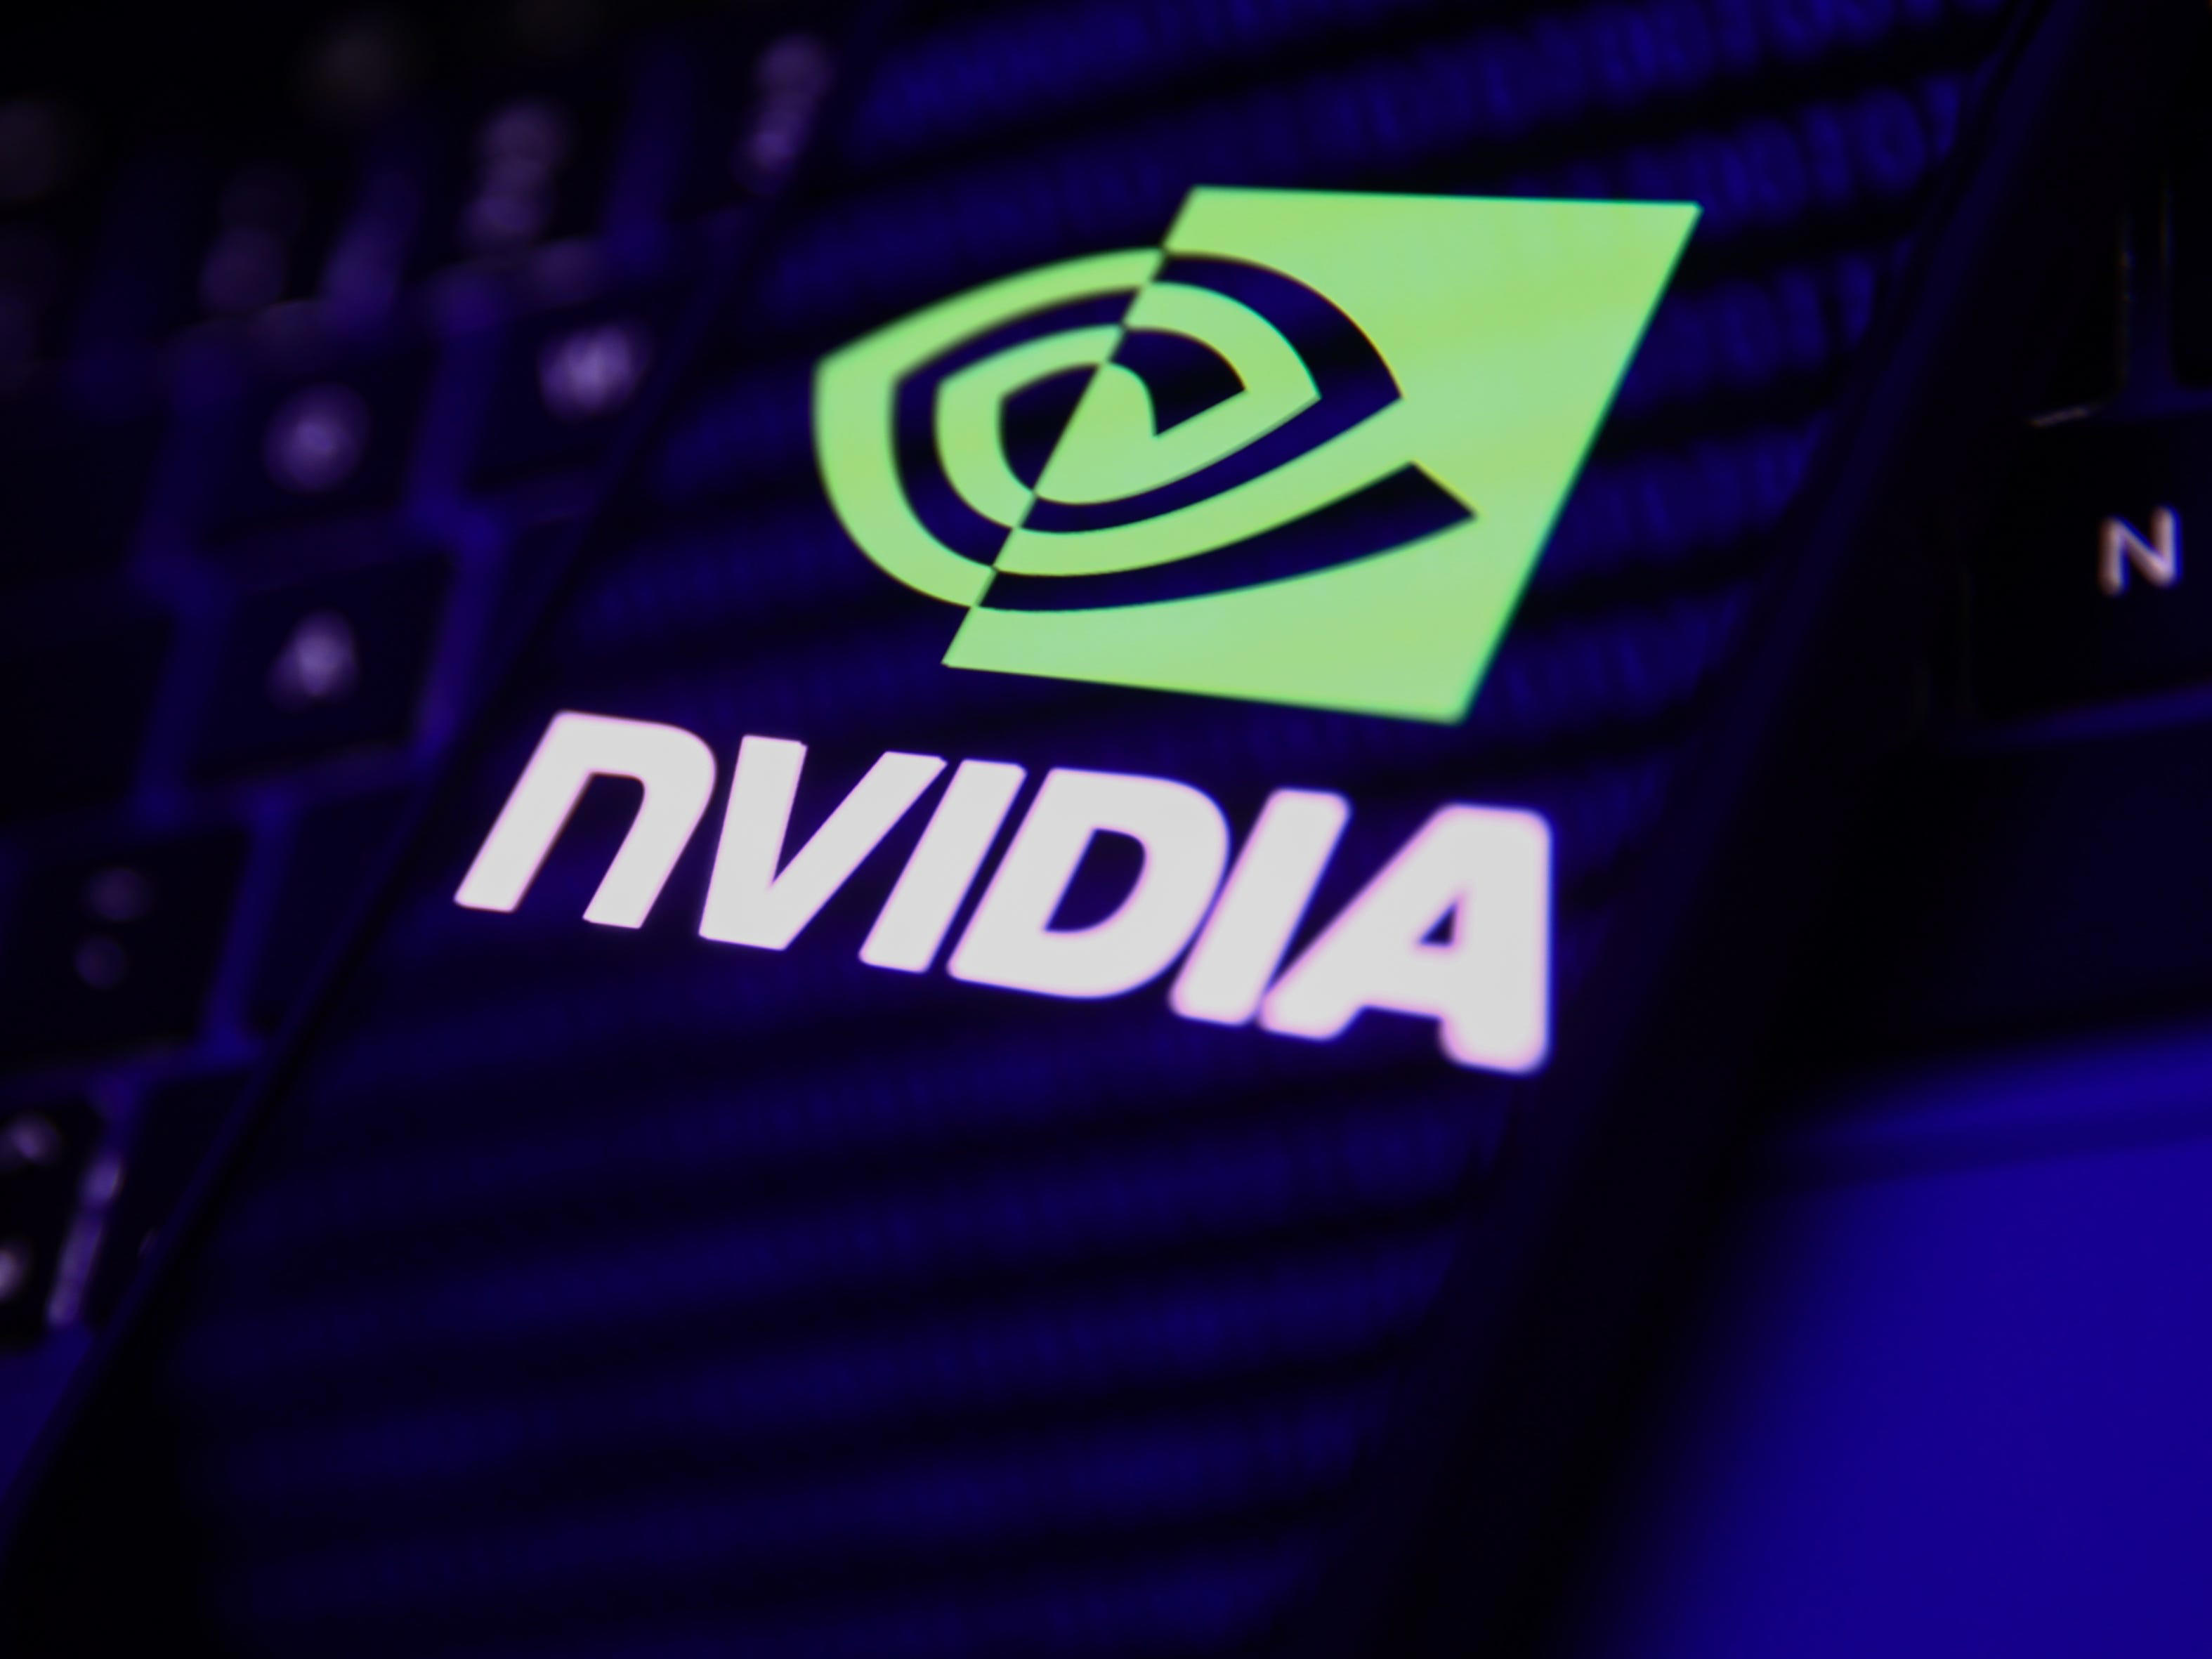 Chinese companies aren't interested in Nvidia's slower AI chips